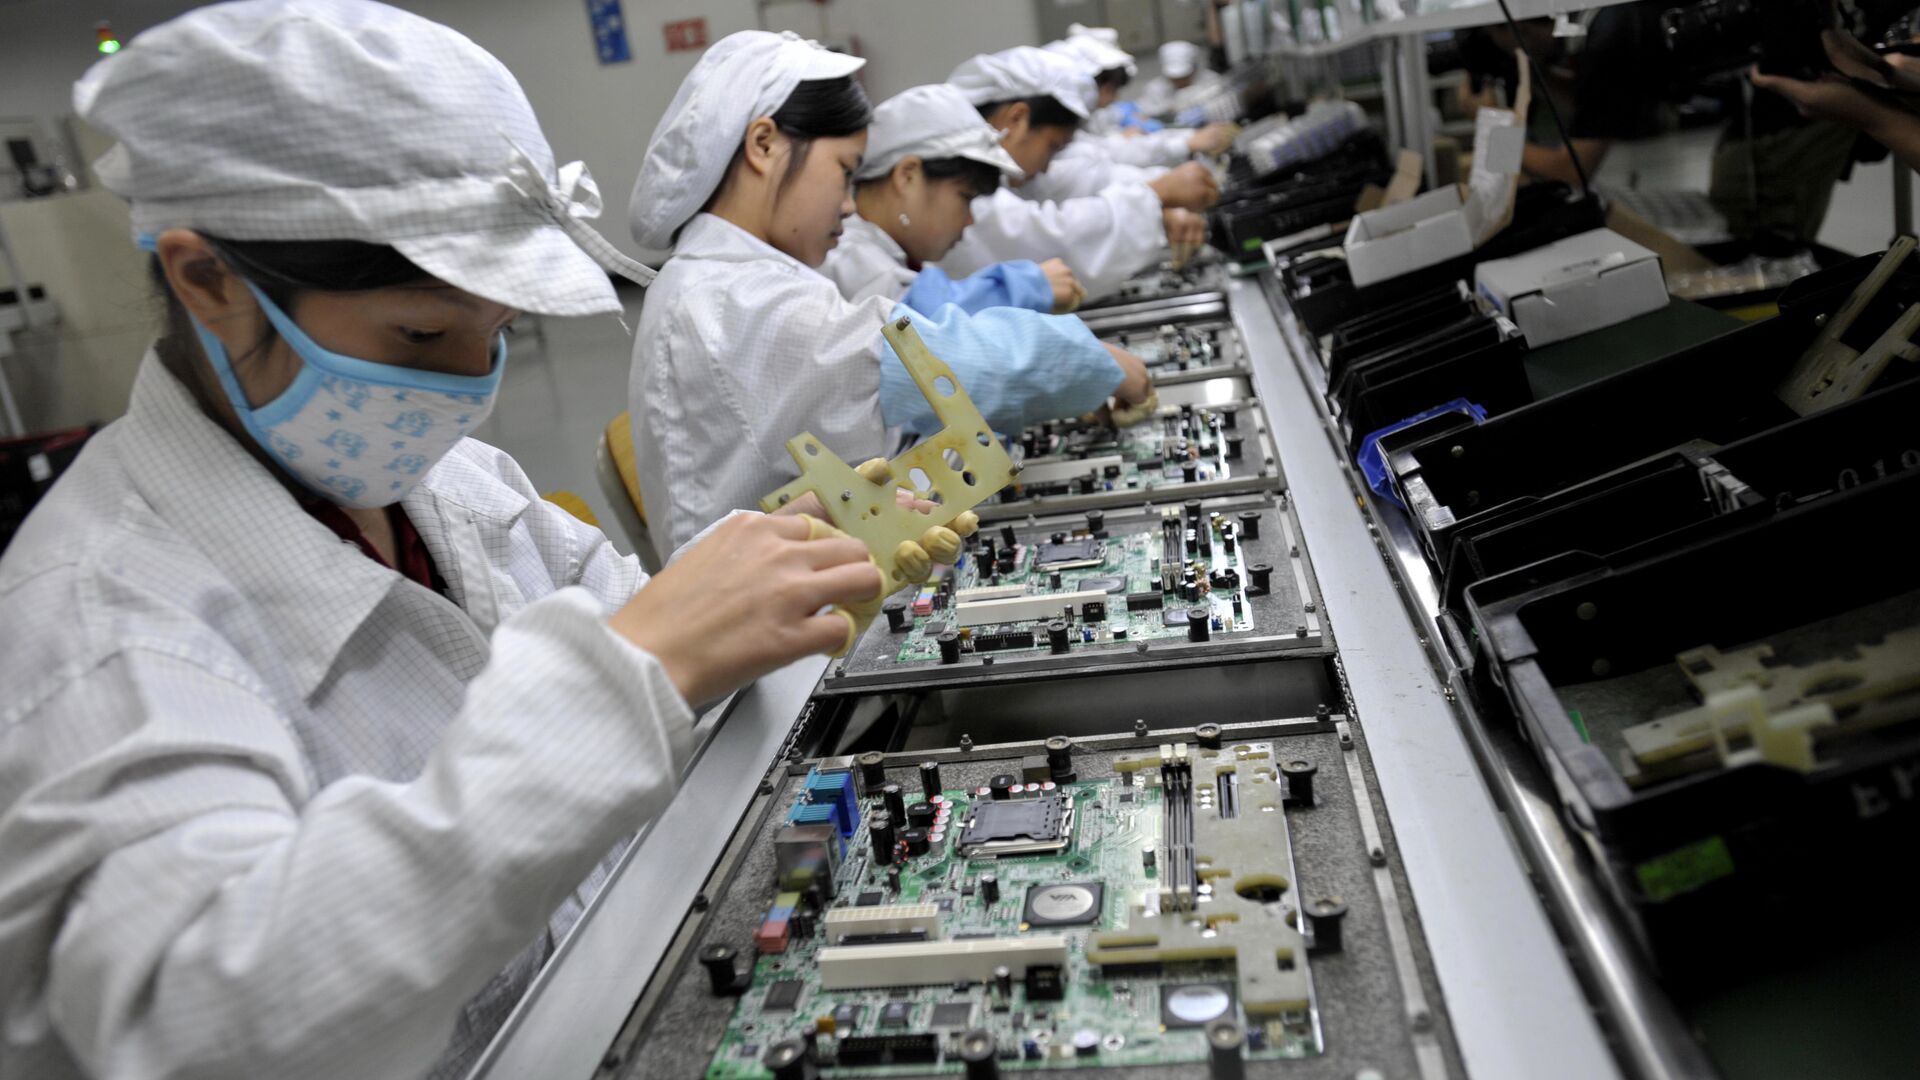 Chinese workers assemble electronic components at the Foxconn's factory in Shenzhen, in the southern Guangzhou province (File) - Sputnik International, 1920, 17.01.2023